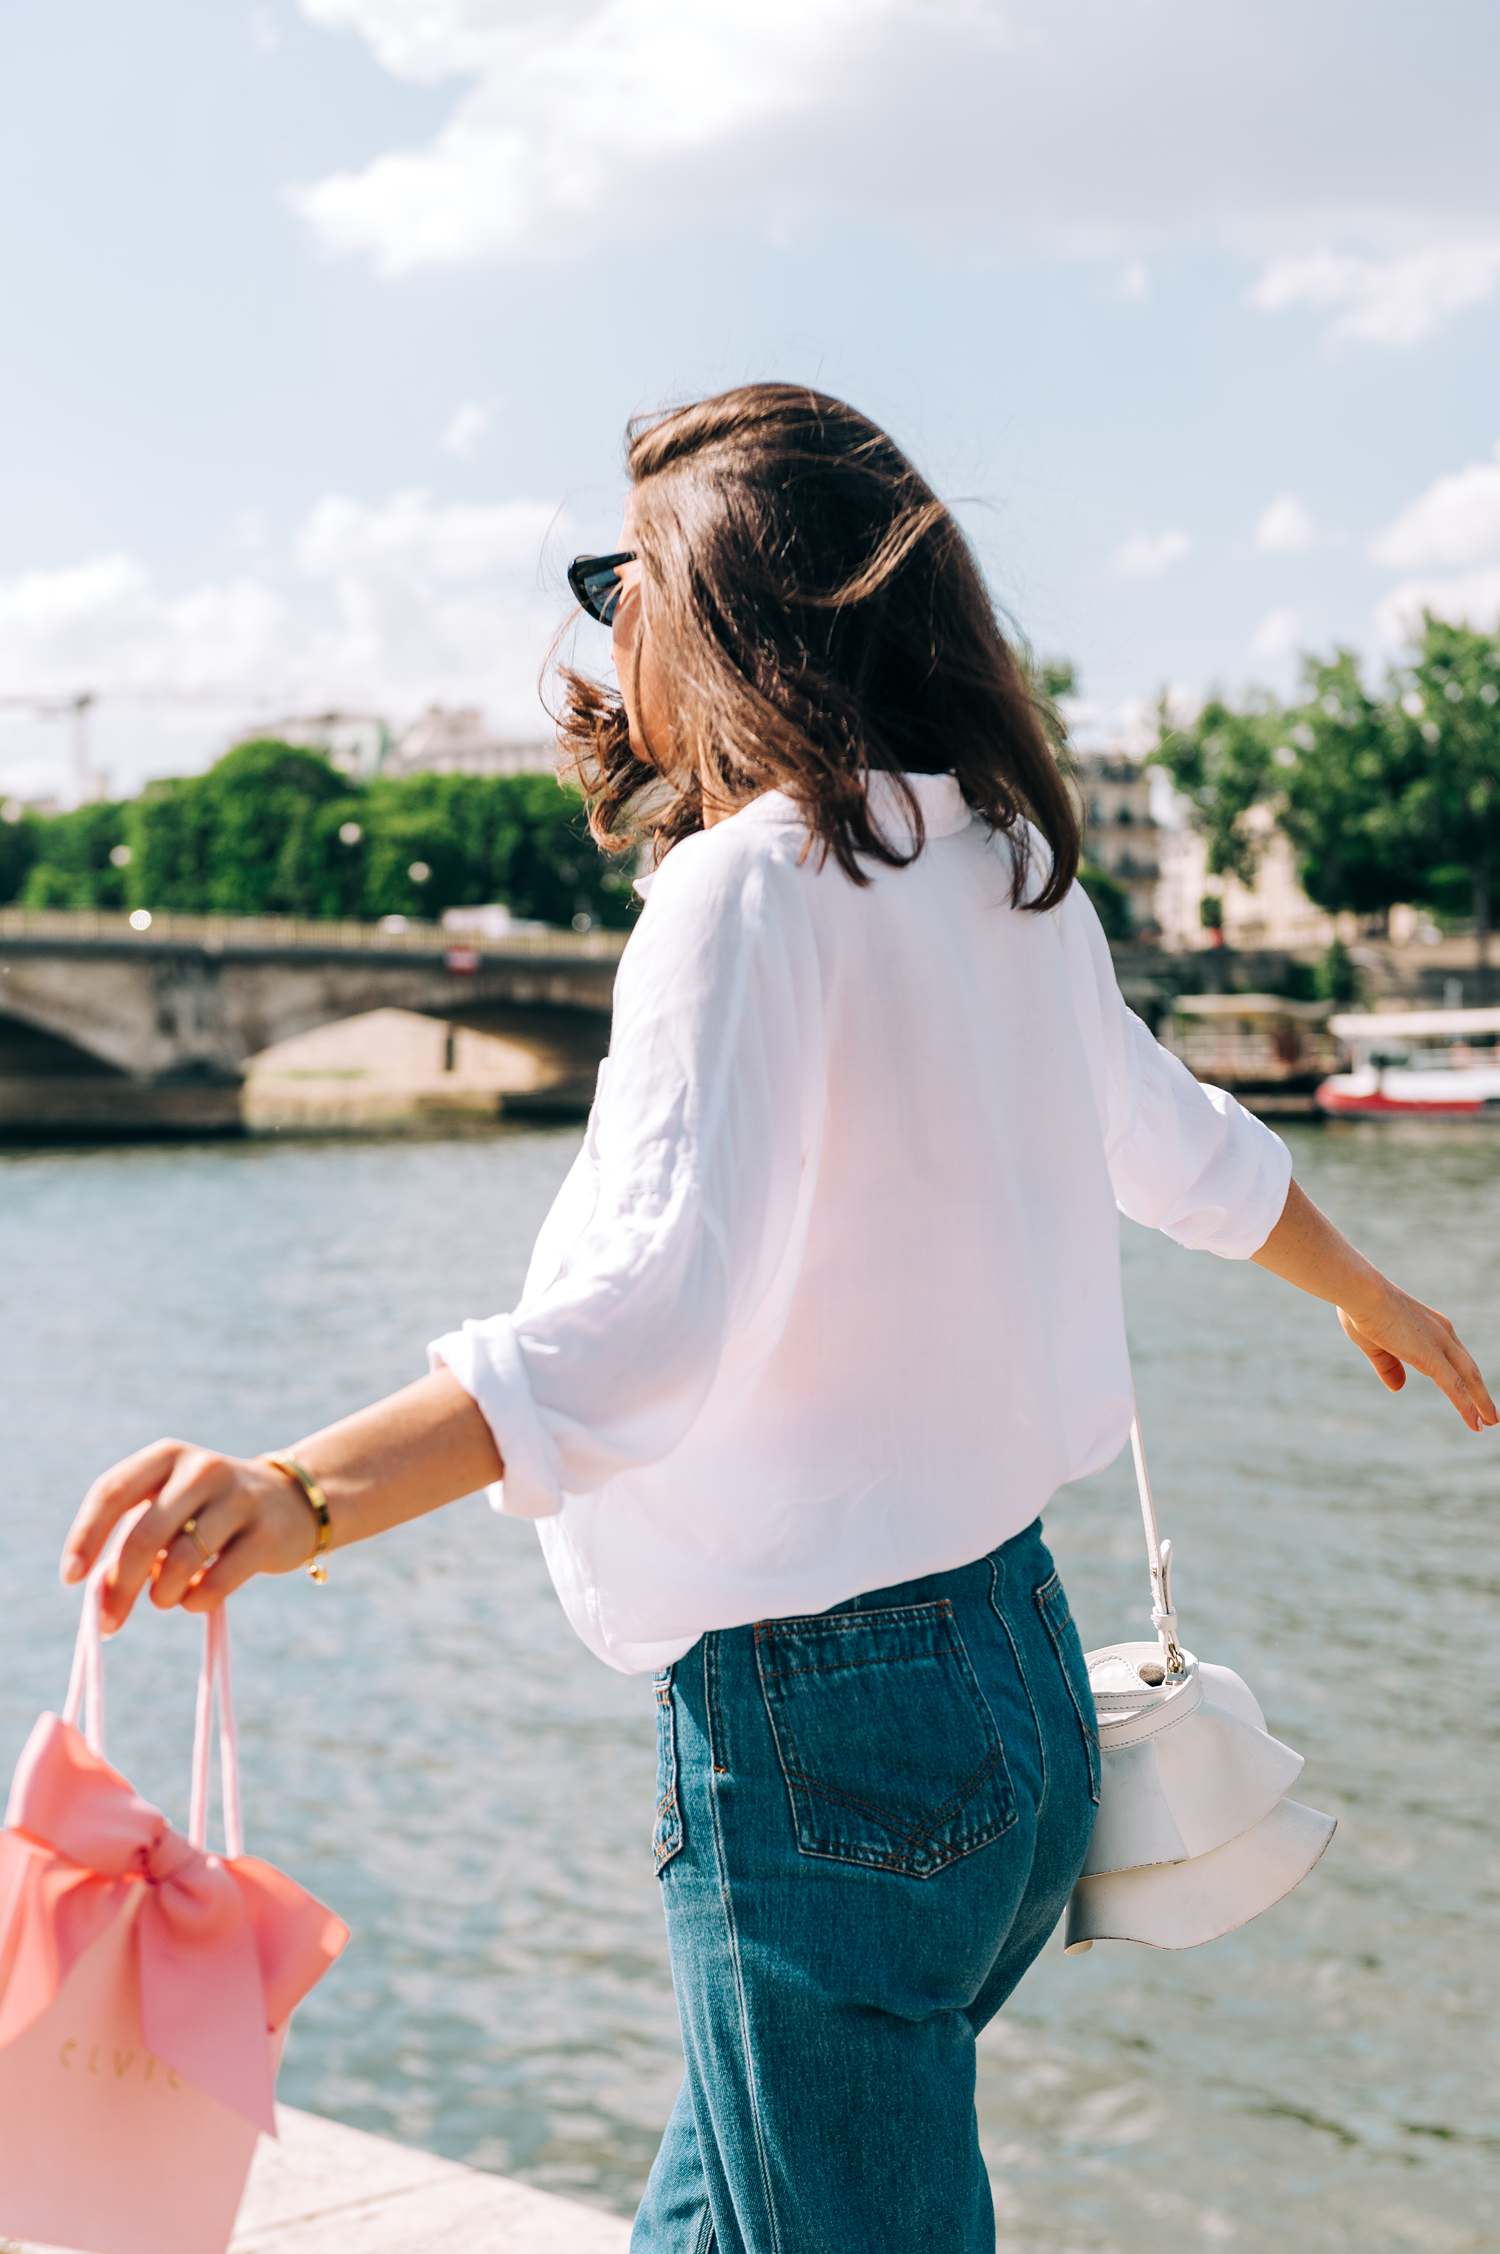 windswept lifestyle image of model on the banks of the seine wearing elvie jewelry and carrying the brand's small shopping bag as she walks